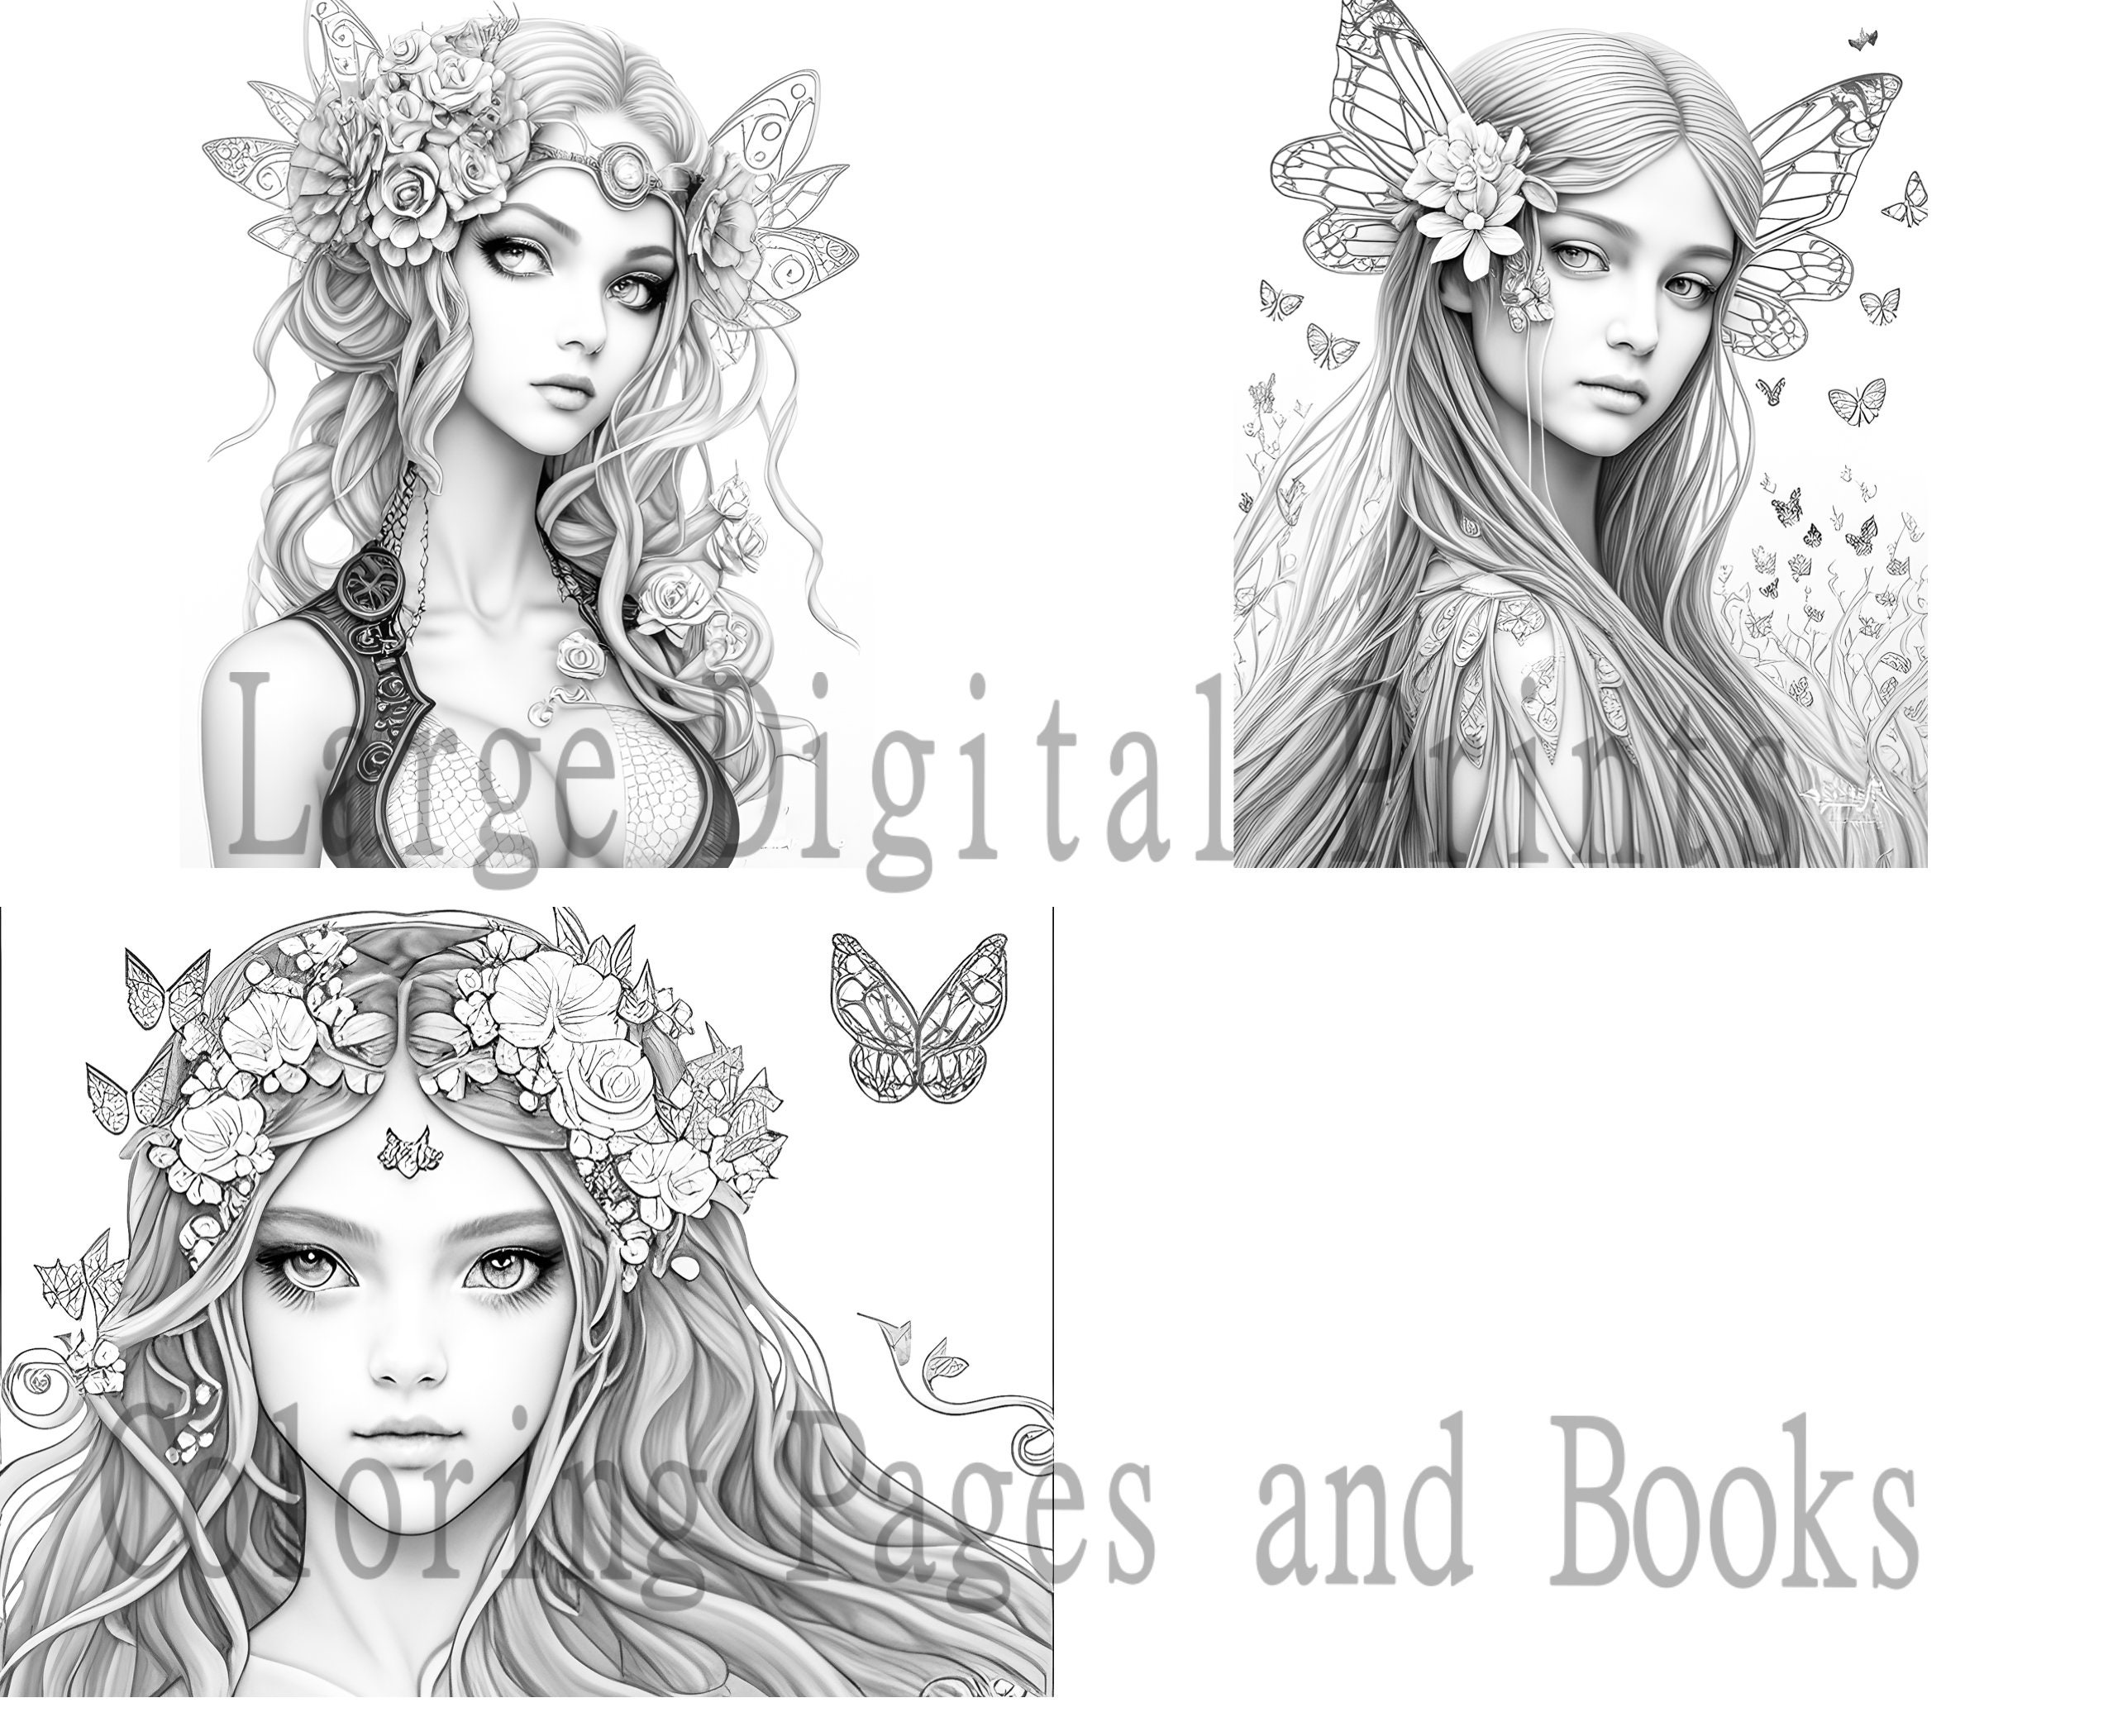 28 Magical Fairies Coloring Pages, Adults Kids Instant Download, Grayscale,  Gift, Printable Art, Fall Mandala Floral Coloring Books PDF 